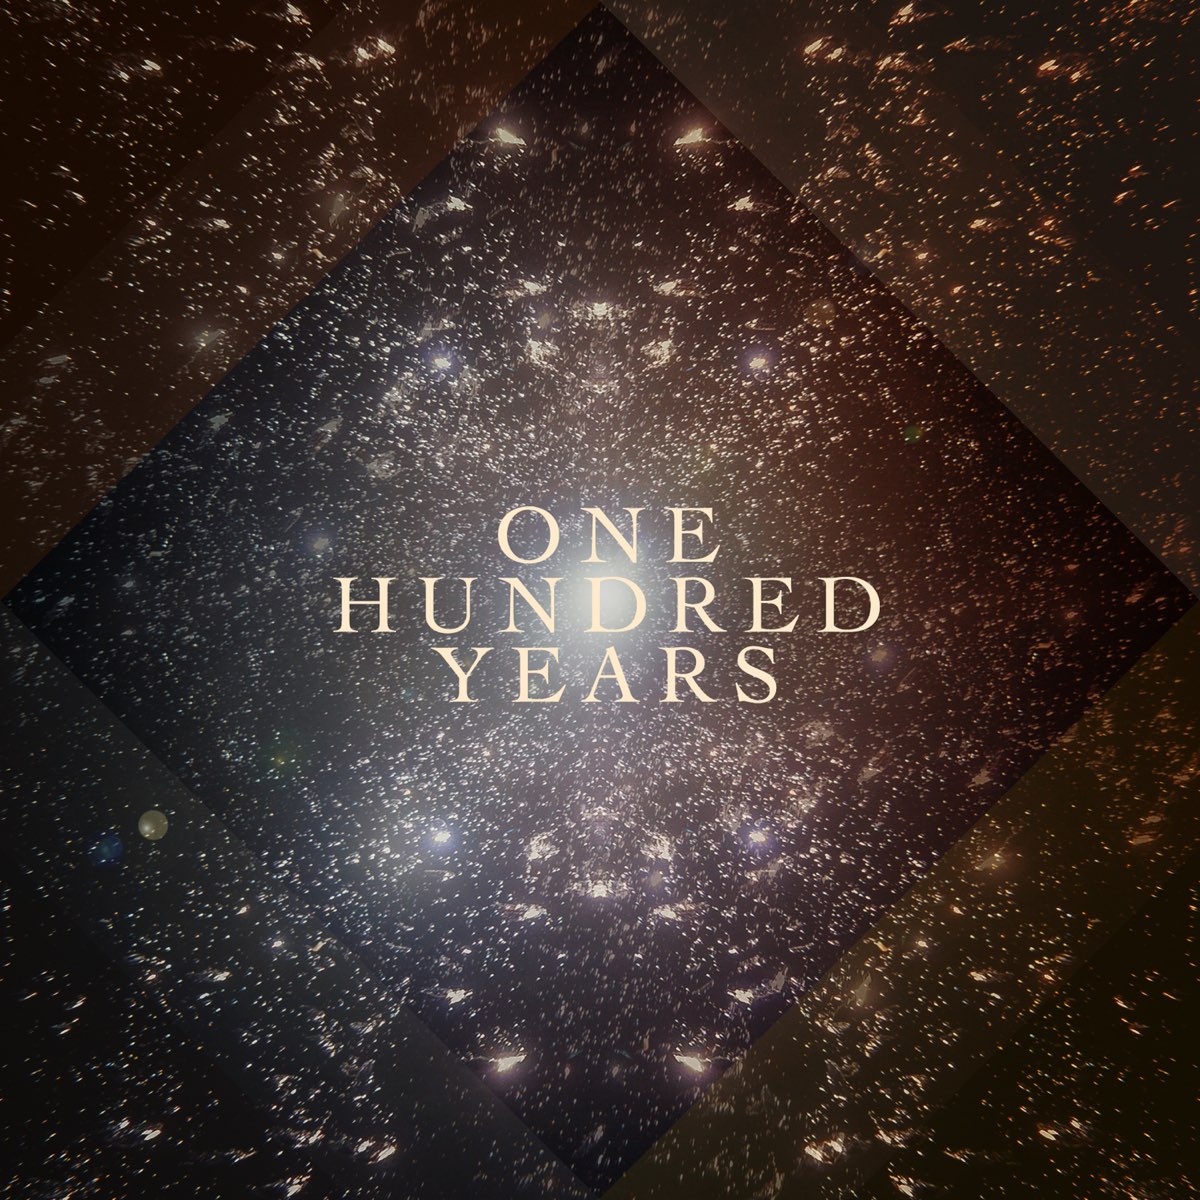 One hundred years is. 100 Years Infinity.